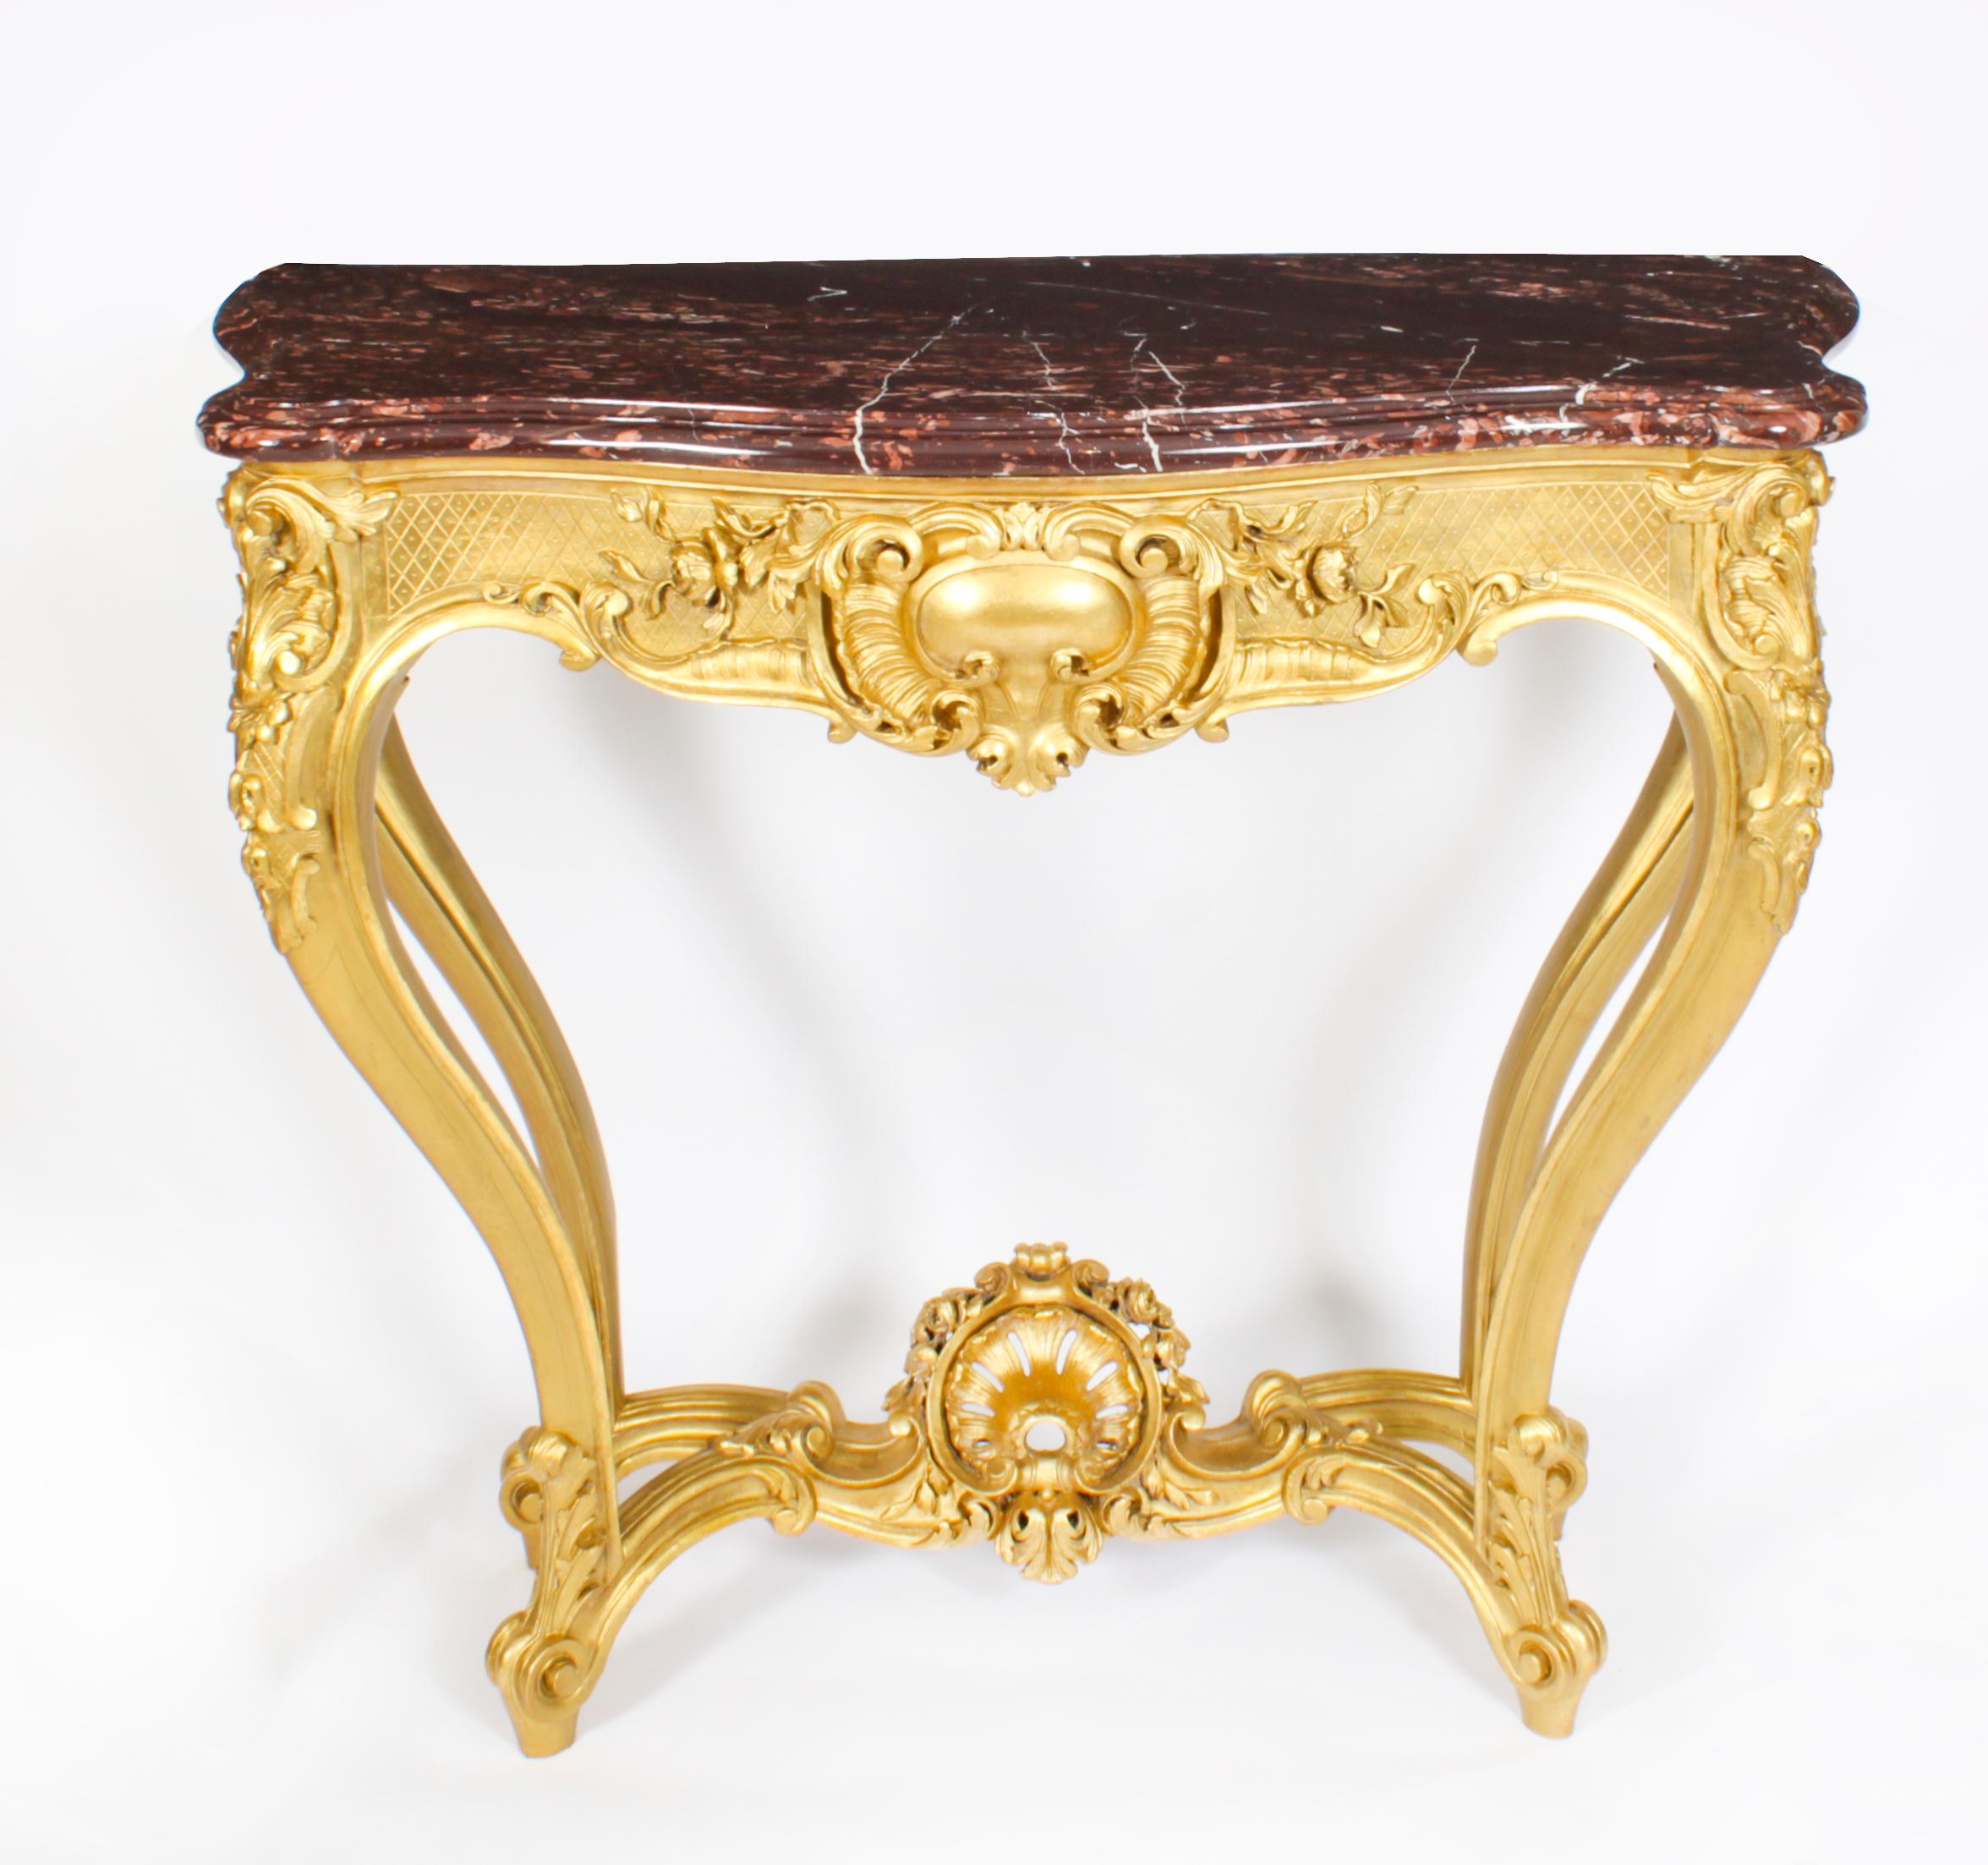 A fine antique Louis XV Revival carved giltwood marble topped console table, circa 1830 in date.
 
This finely carved giltwood console table is surmounted with an exquisite shaped rectangular Vielle Brun marble top above a frieze carved with